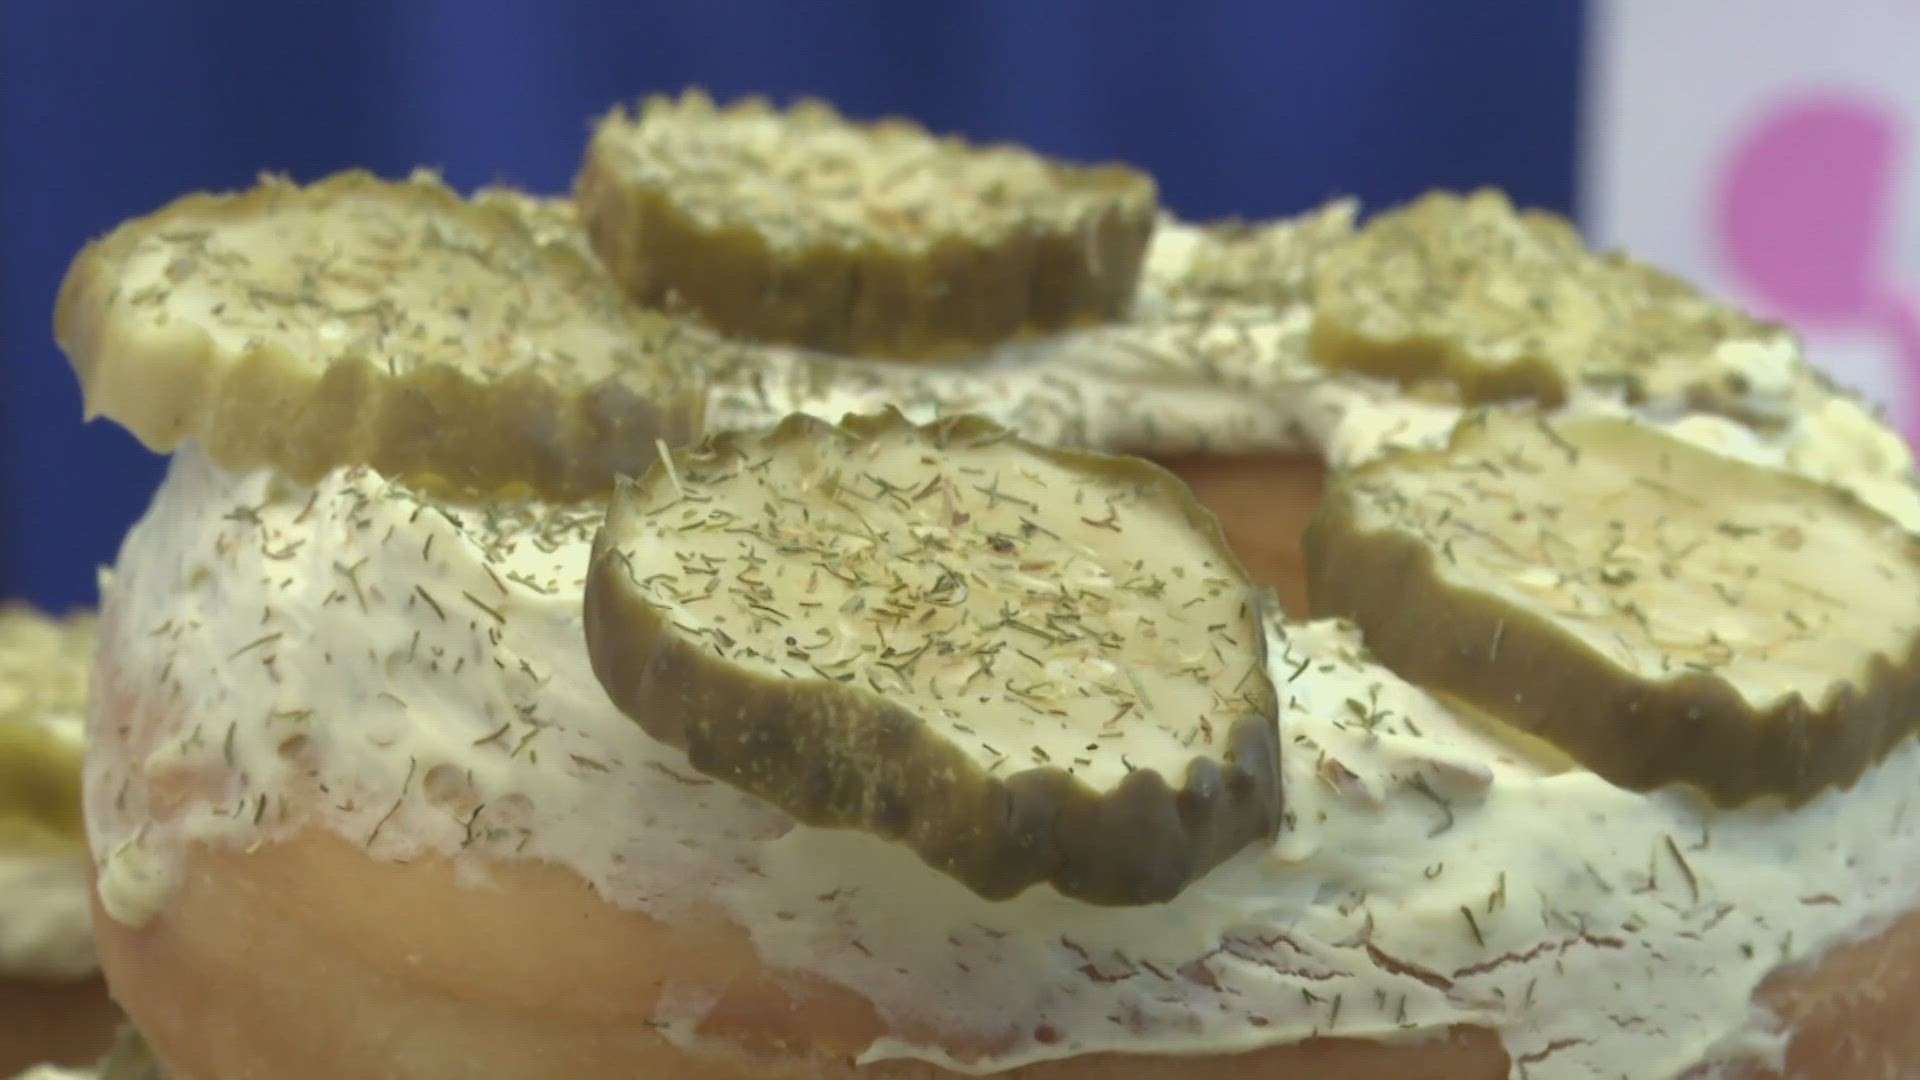 Christian Morgan tries the dill pickle donut ahead of the State Fair.